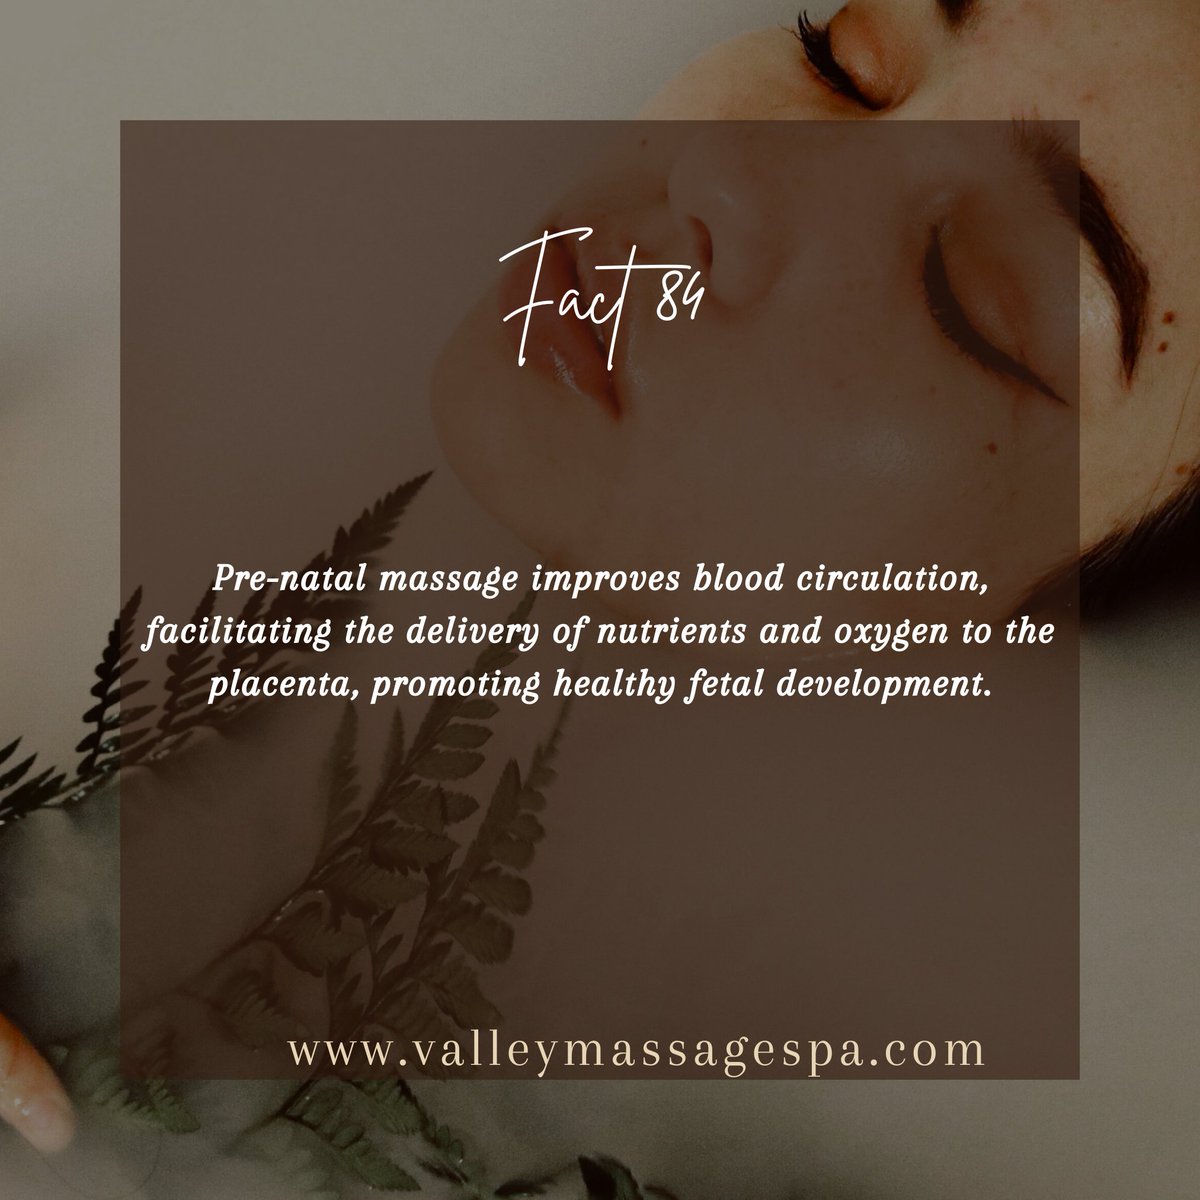 Join us at Valley Massage Spa for 100 days of massage facts! Discover the benefits of pre-natal massage and experience ultimate relaxation. Book your appointment today and let our skilled therapists take care of you. #ValleyMassageSpa #PrenatalMassage #Relaxation